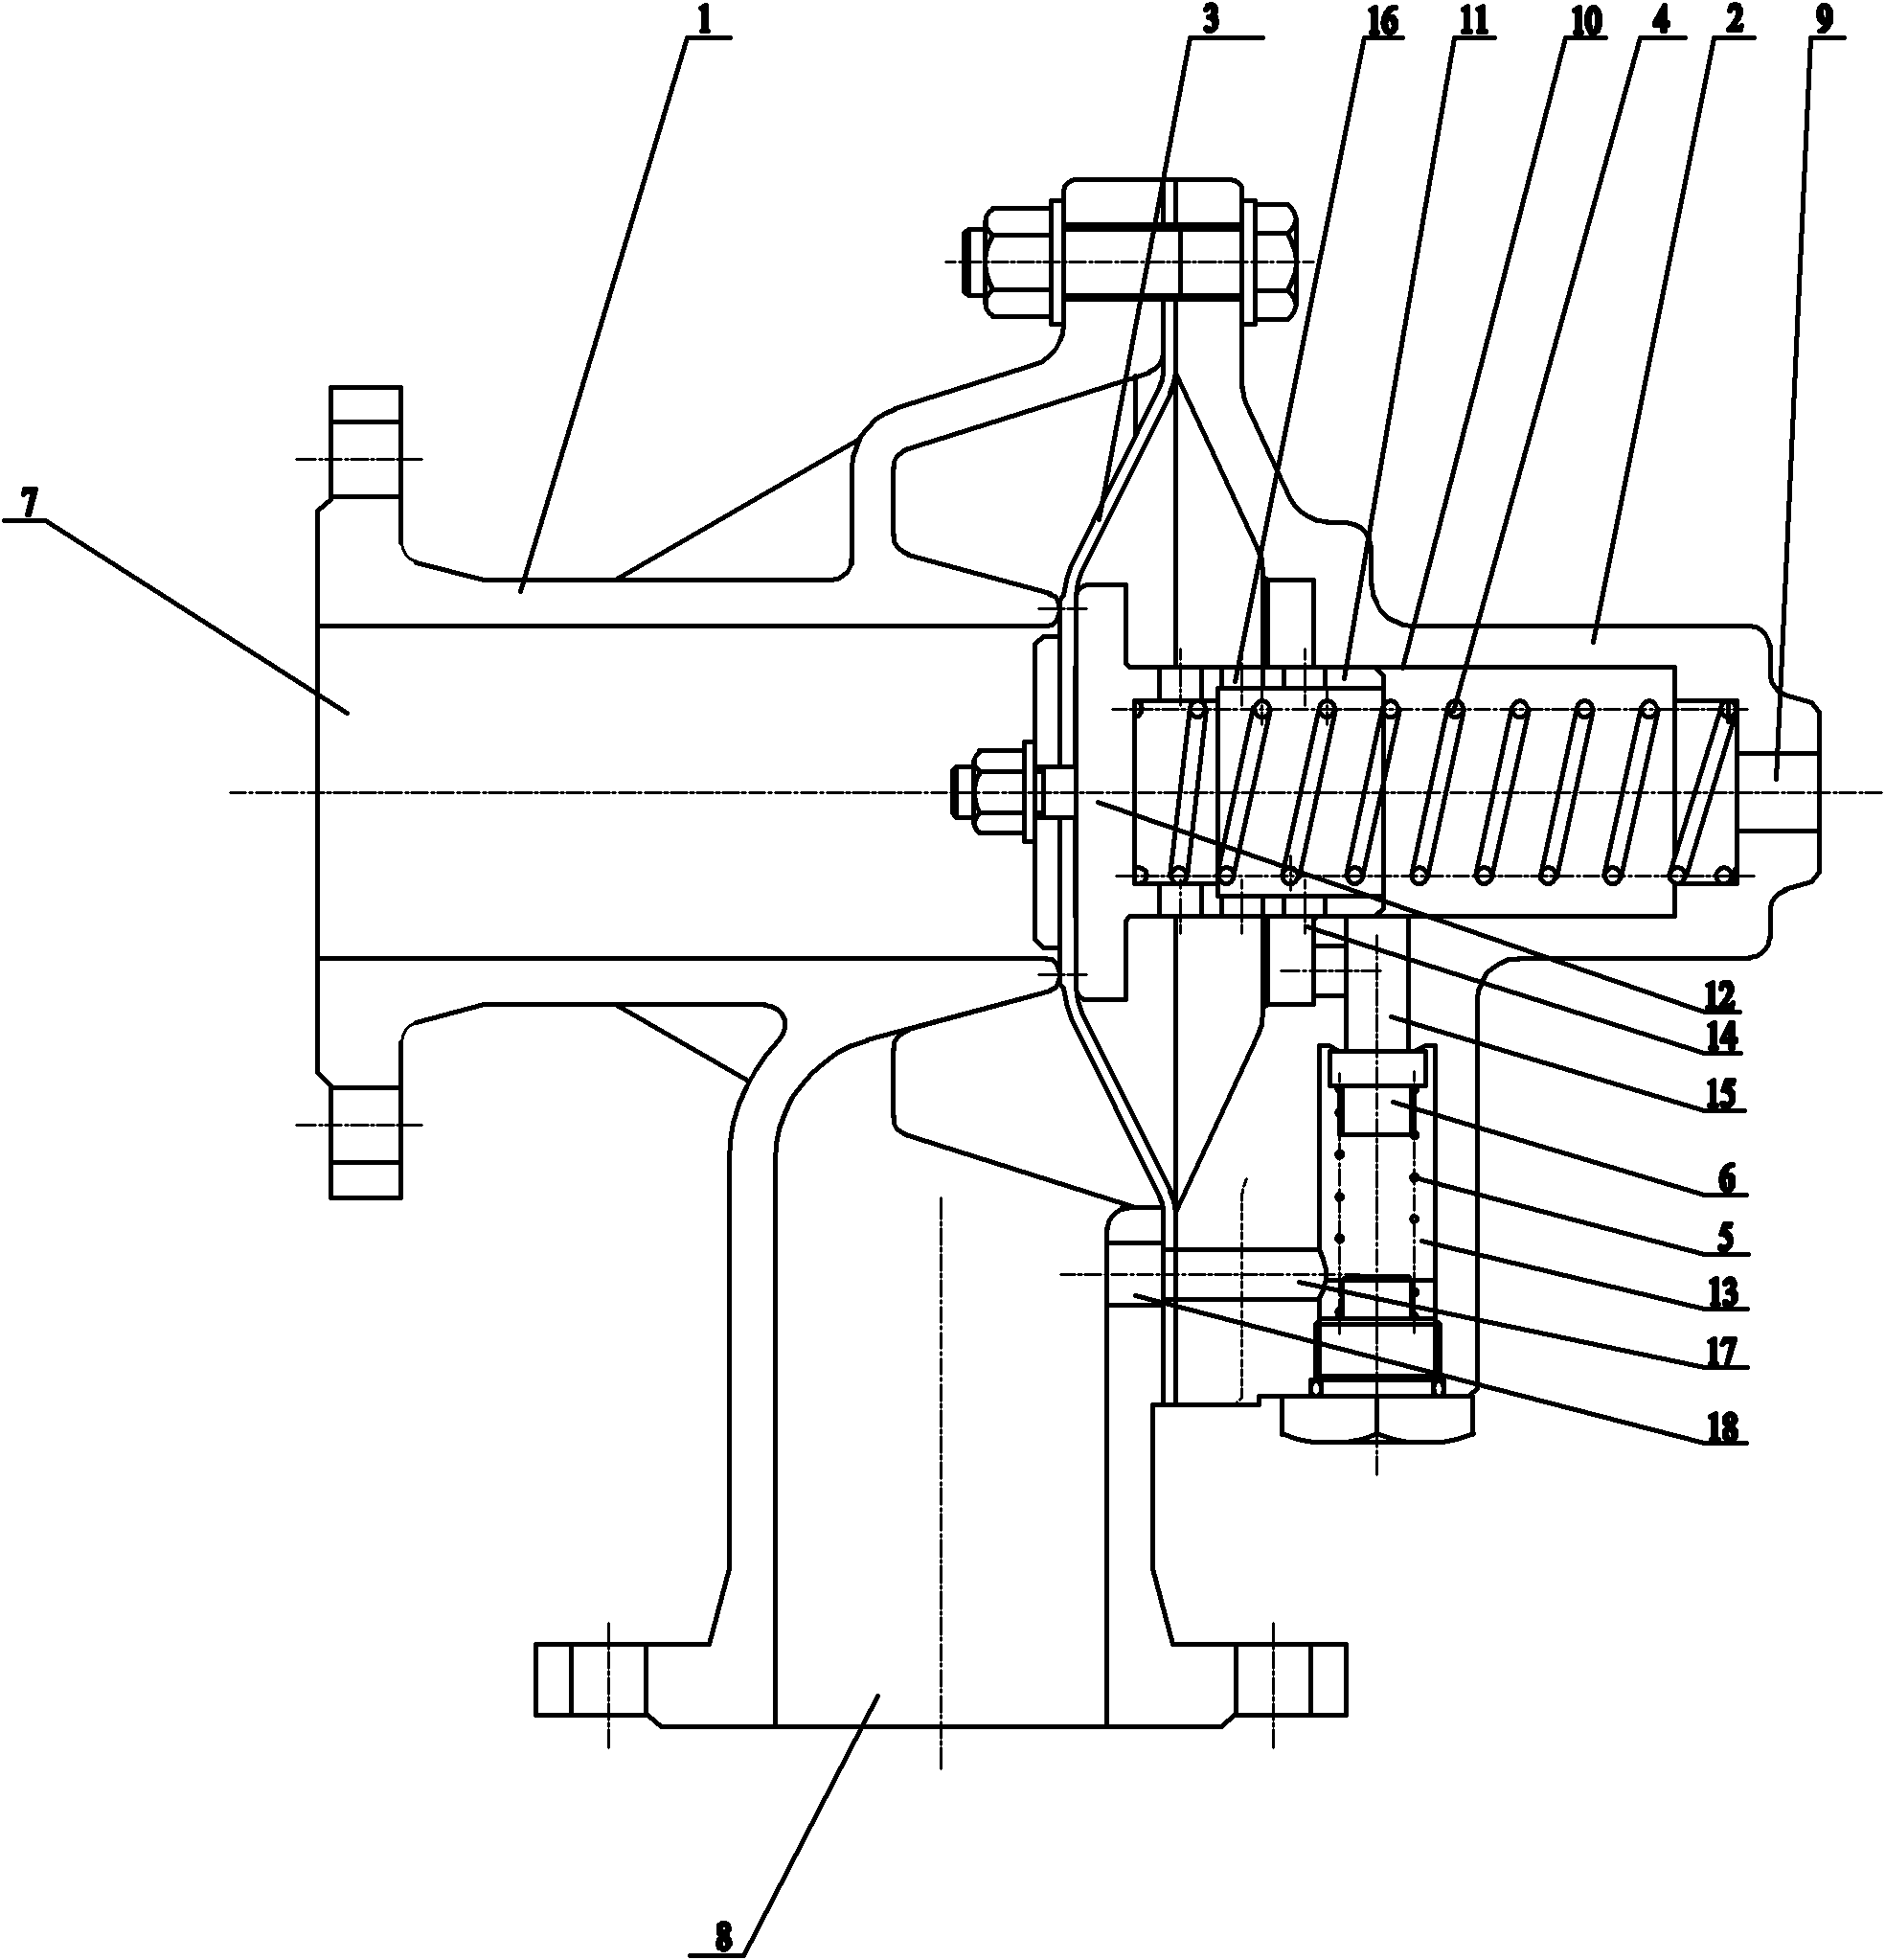 Intake and exhaust integrated pulse valve